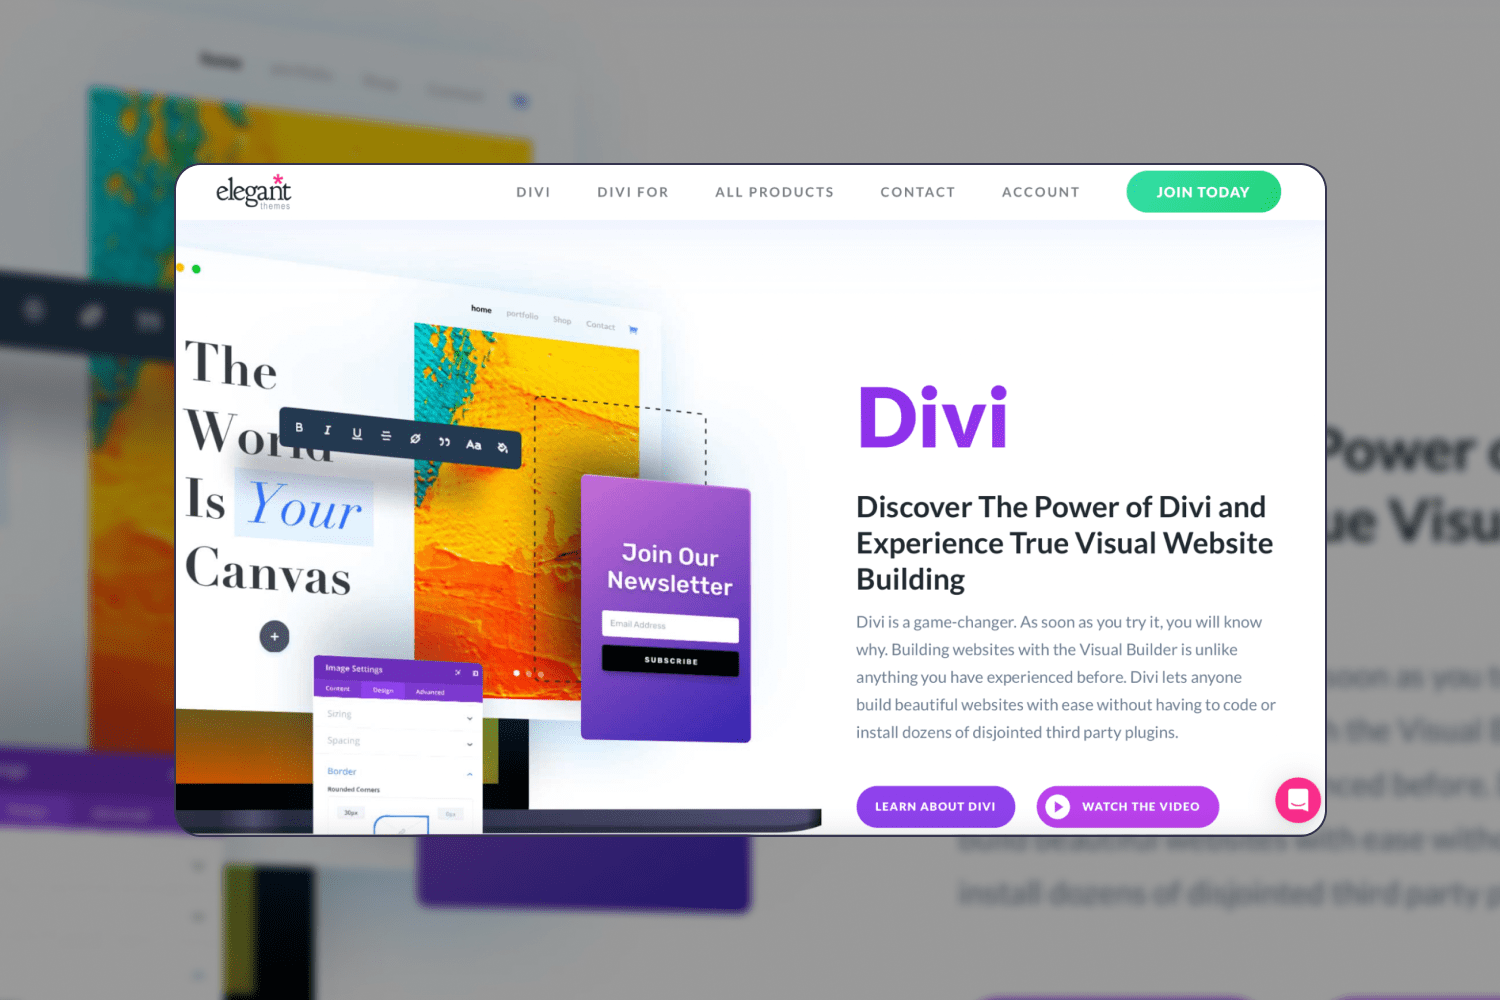 Screenshot of the main page of the Divi website with text and images.